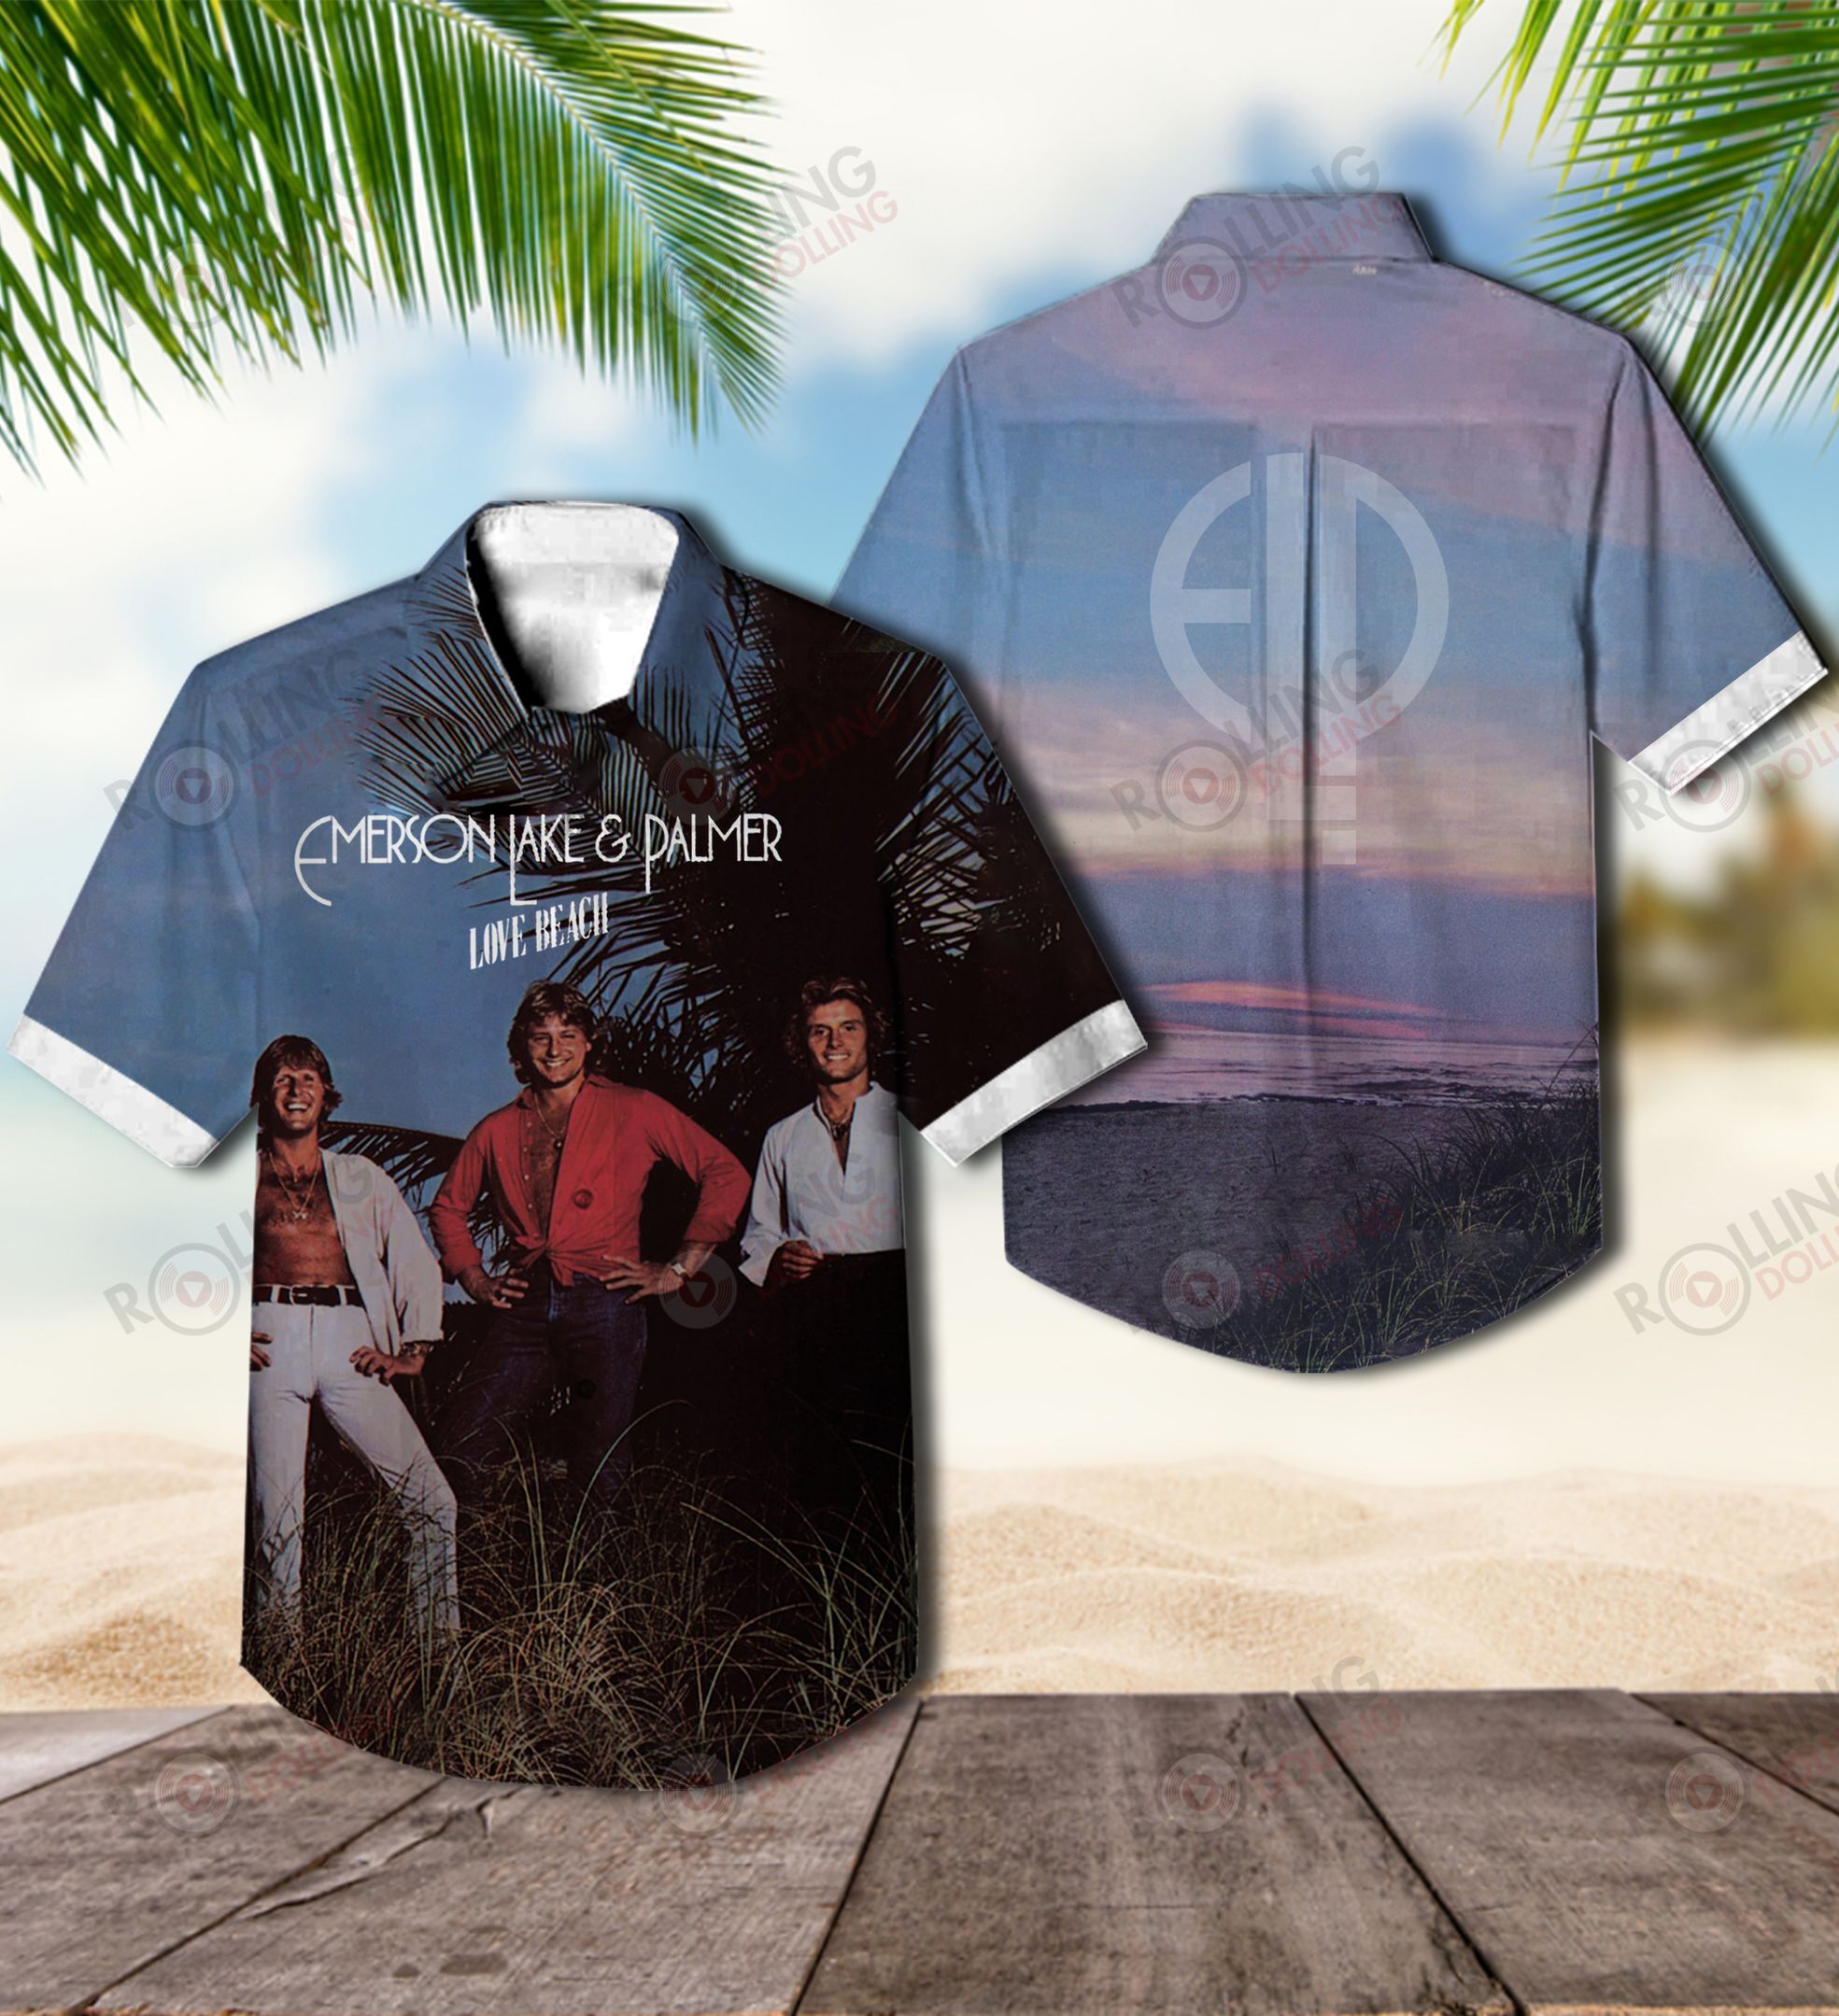 This would make a great gift for any fan who loves Hawaiian Shirt as well as Rock band 52